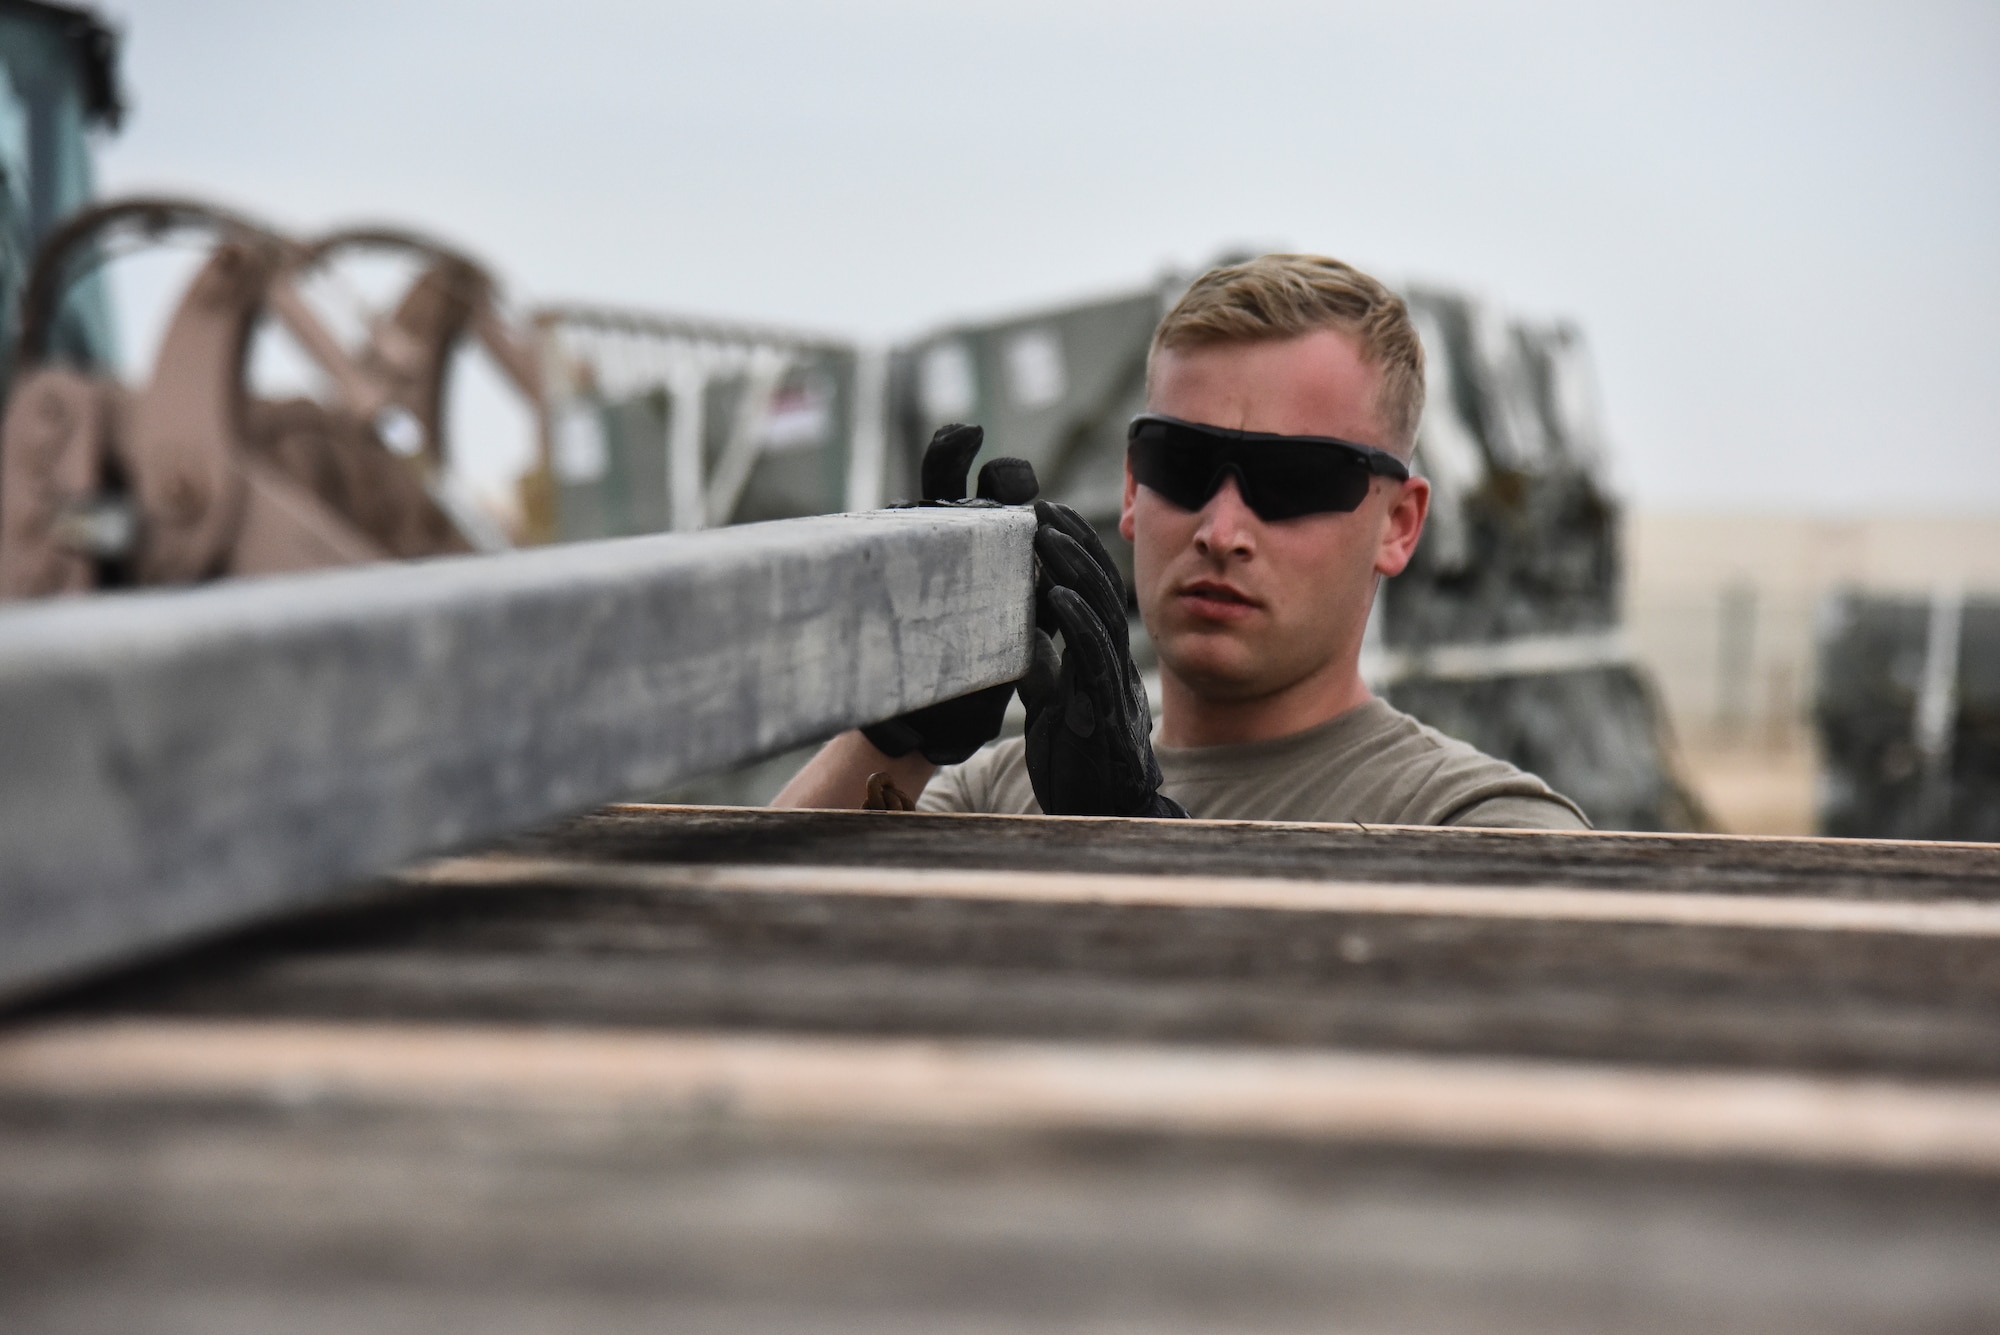 Senior Airman Christopher Madonna, 380th Expeditionary Maintenance Squadron munitions journeyman, aligns the dunnage at Al Dhafra Air Base, United Arab Emirates, Feb. 15, 2019. The munitions flight is responsible for preparing and loading munitions on aircraft, inspecting munitions for serviceability and conducting inventories and correct discrepancies. (U.S. Air Force photo by Senior Airman Mya M. Crosby)